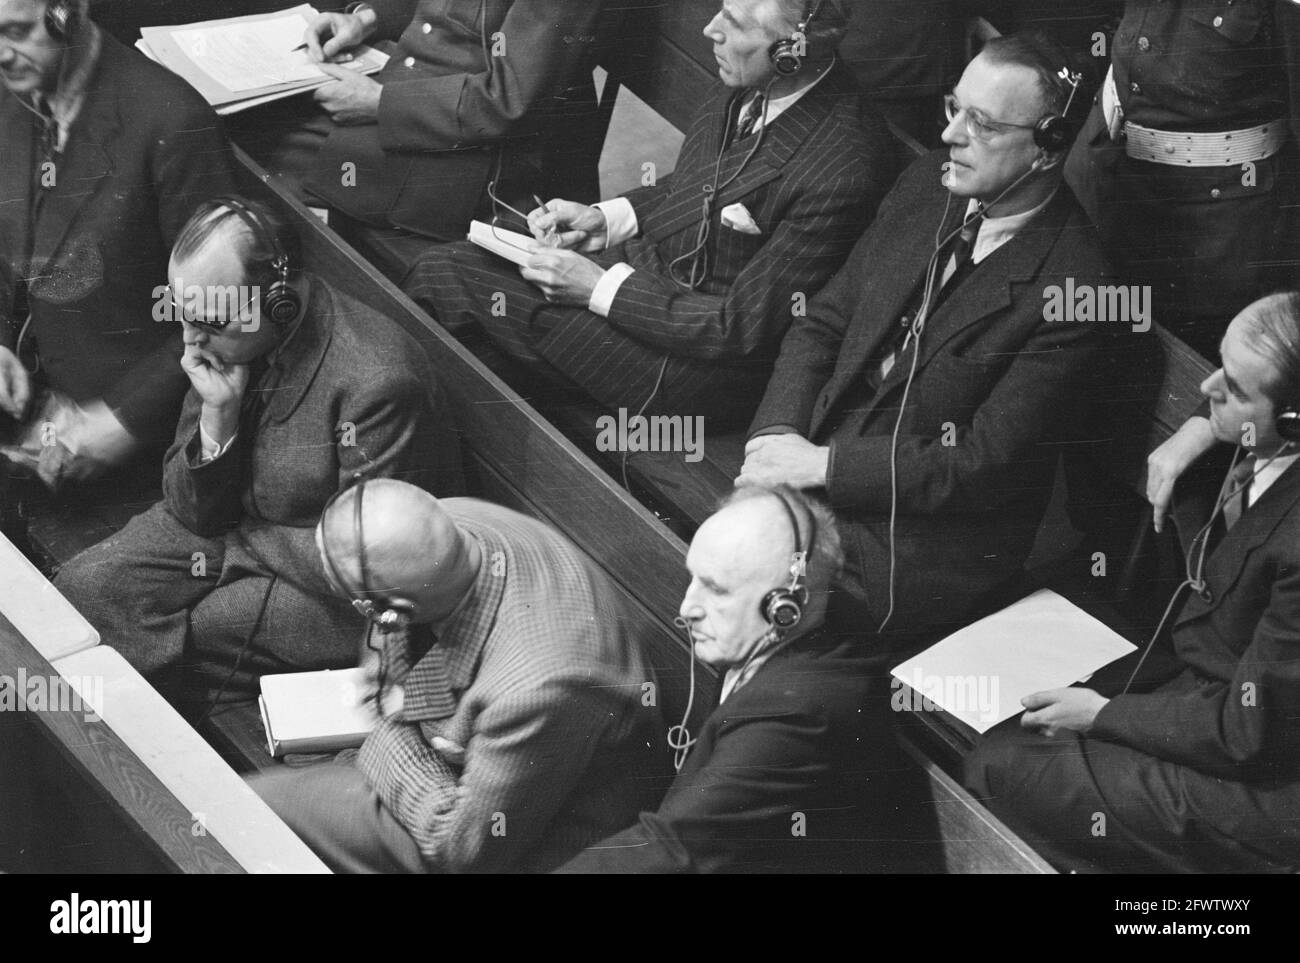 Nuremberg Trial. Defendants; with glasses Arthur Seyss-Inquart, on right next to him Albert Speer, December 4, 1945, war criminals, trials, justice, World War II, The Netherlands, 20th century press agency photo, news to remember, documentary, historic photography 1945-1990, visual stories, human history of the Twentieth Century, capturing moments in time Stock Photo